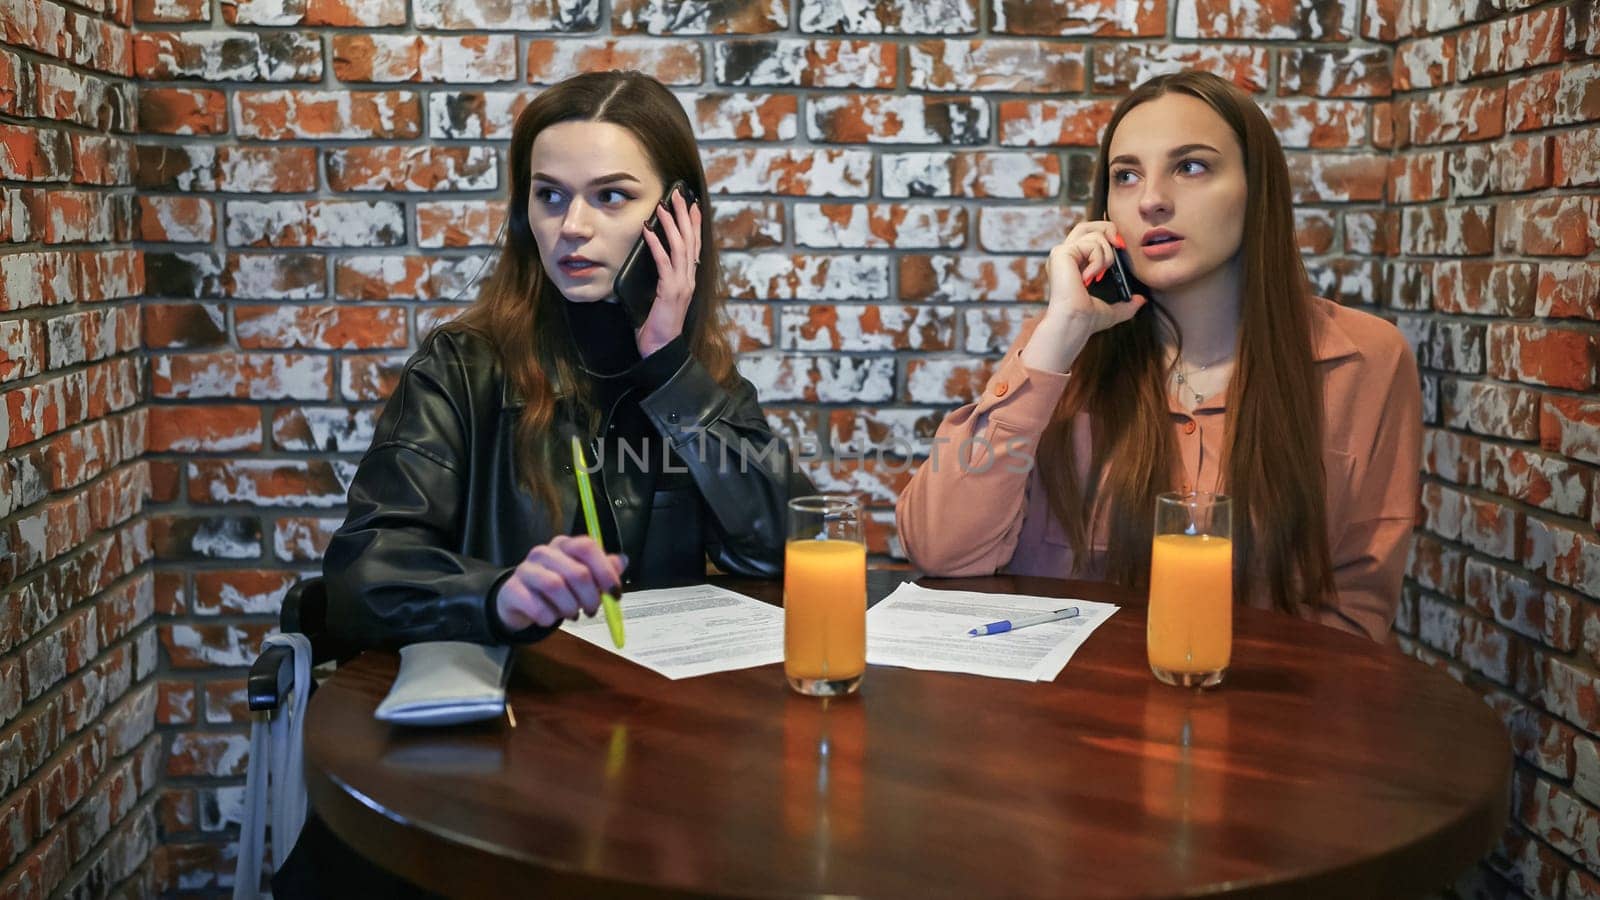 girls talking on their cell phones in a cafe. by DovidPro